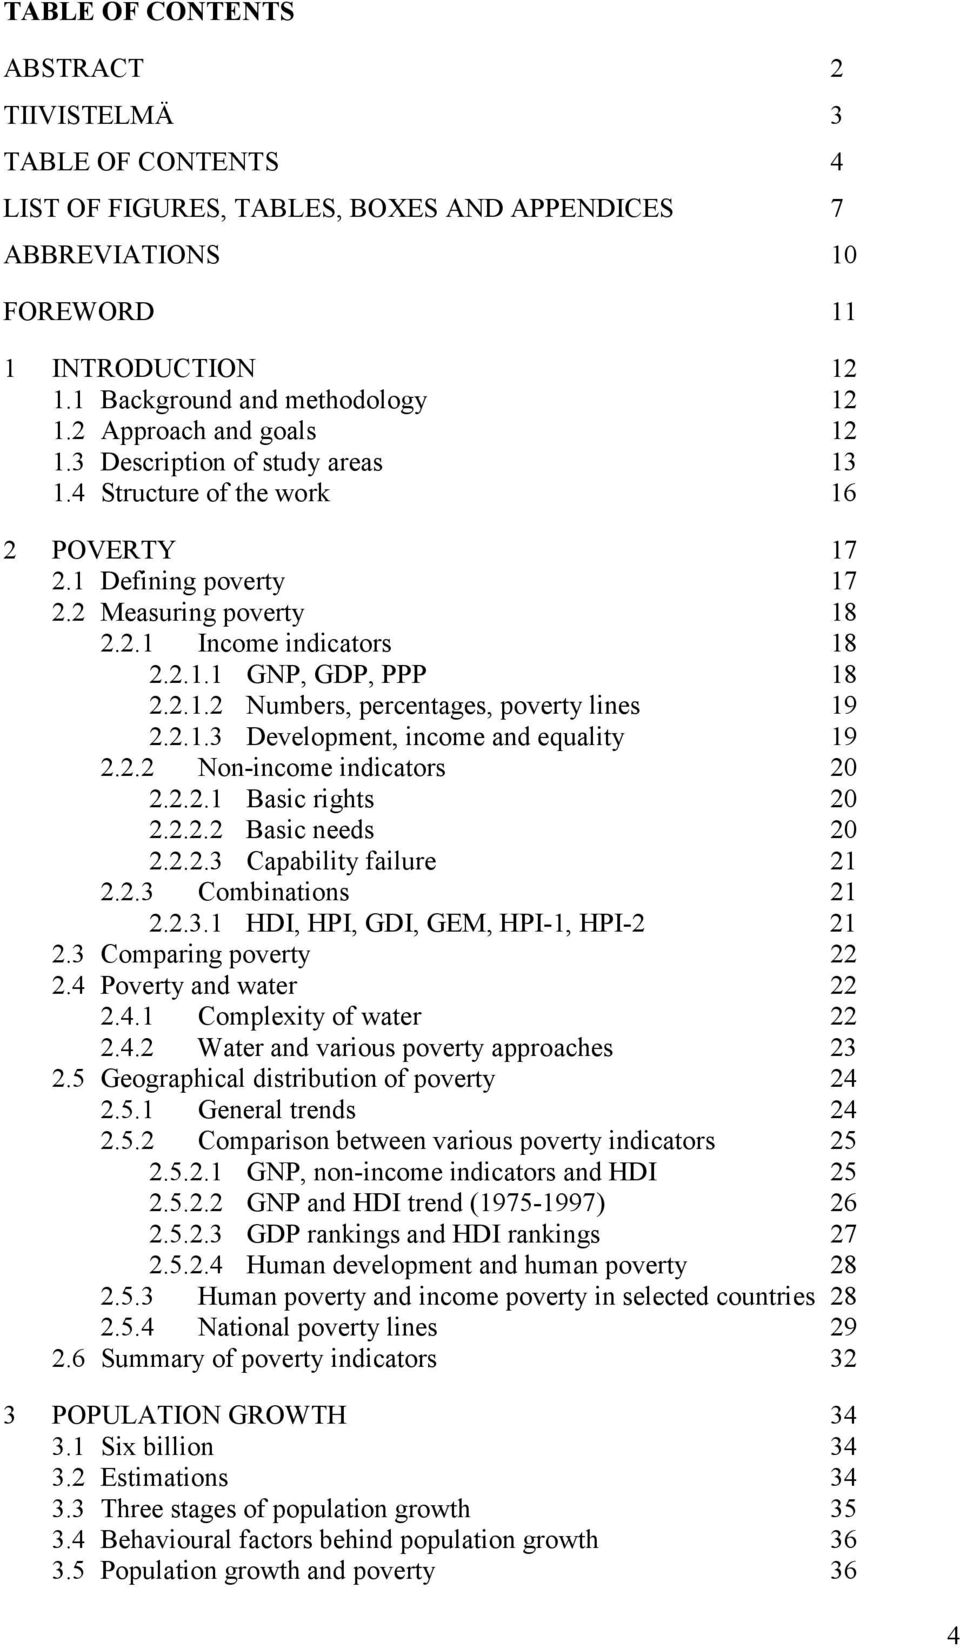 2.1.2 Numbers, percentages, poverty lines 19 2.2.1.3 Development, income and equality 19 2.2.2 Non-income indicators 20 2.2.2.1 Basic rights 20 2.2.2.2 Basic needs 20 2.2.2.3 Capability failure 21 2.